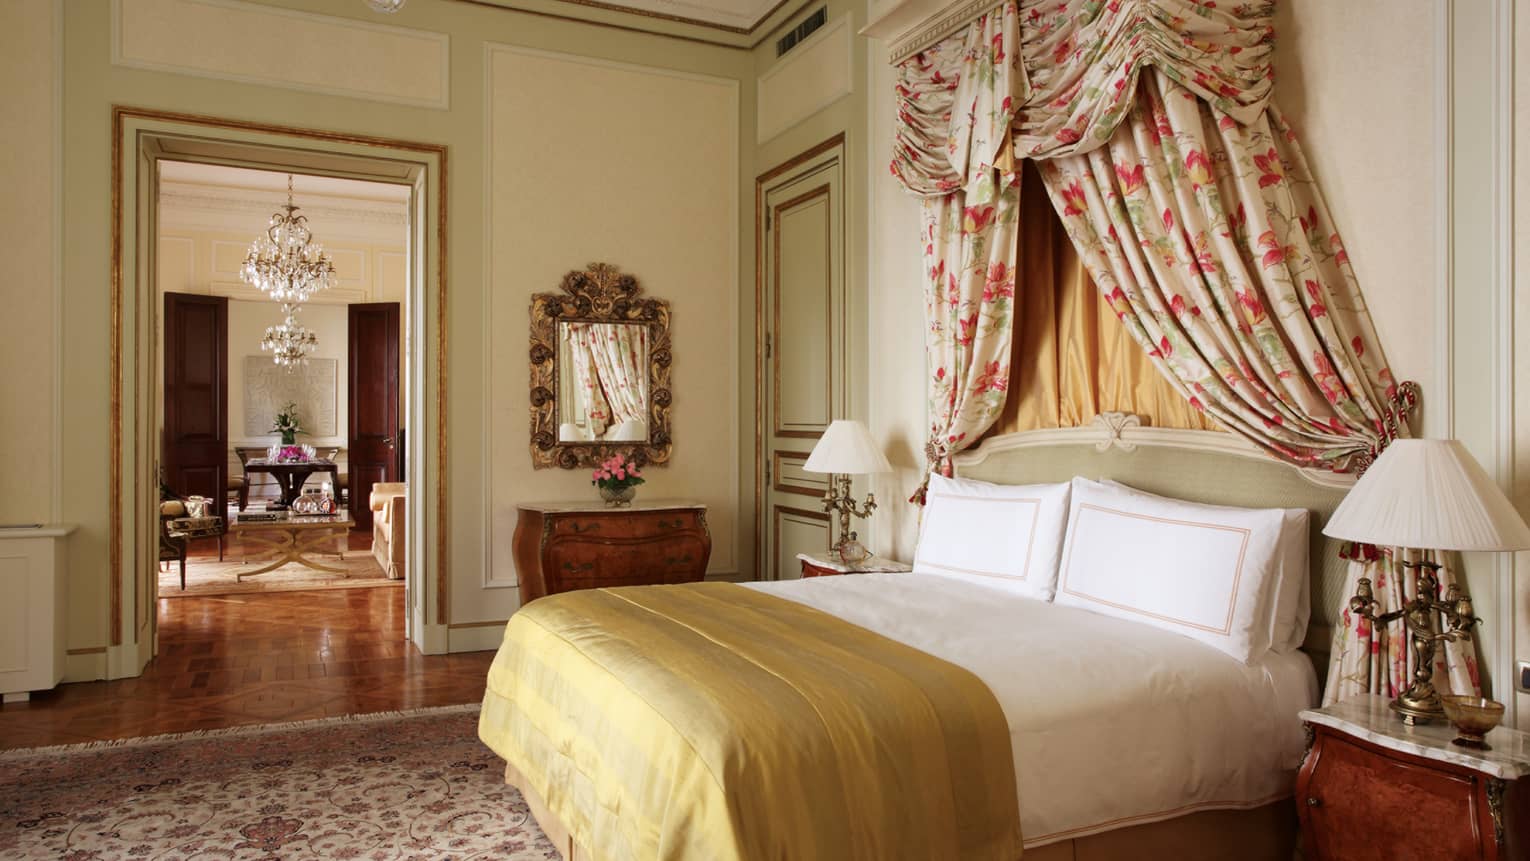 La Mansión Presidential Suite bed with gold blanket, floral drapes above headboard, door to dining room